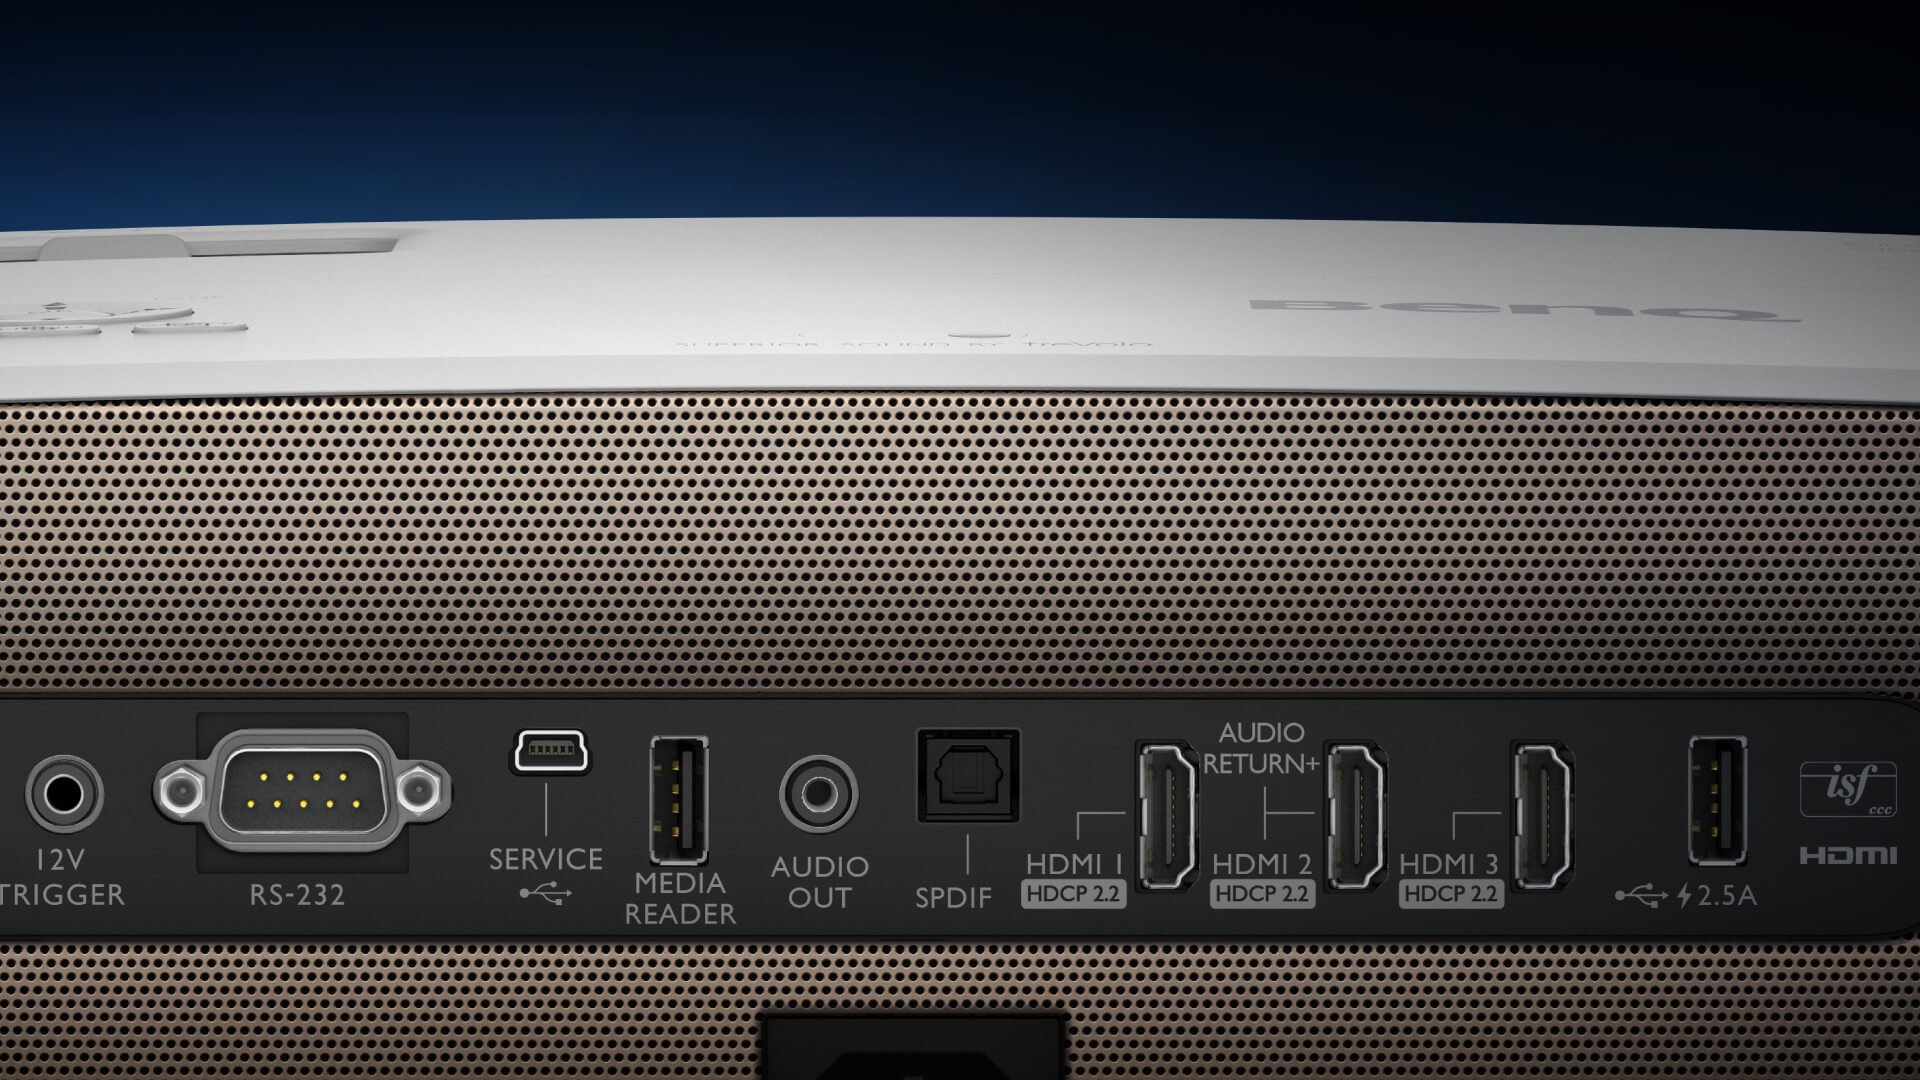 BenQ W2710i connects you to all kinds of entertainment with universal ports including three HDMI 2.0b (HDCP 2.2)*, dual USB Type-A (USB 2.0), SPDIF, and the audio return port with eARC allows 7.1 channel and Dolby Atmos and DTS:X audio pass through, transmitting the original-full resolution audio signal to your sound system via one HDMI cable.